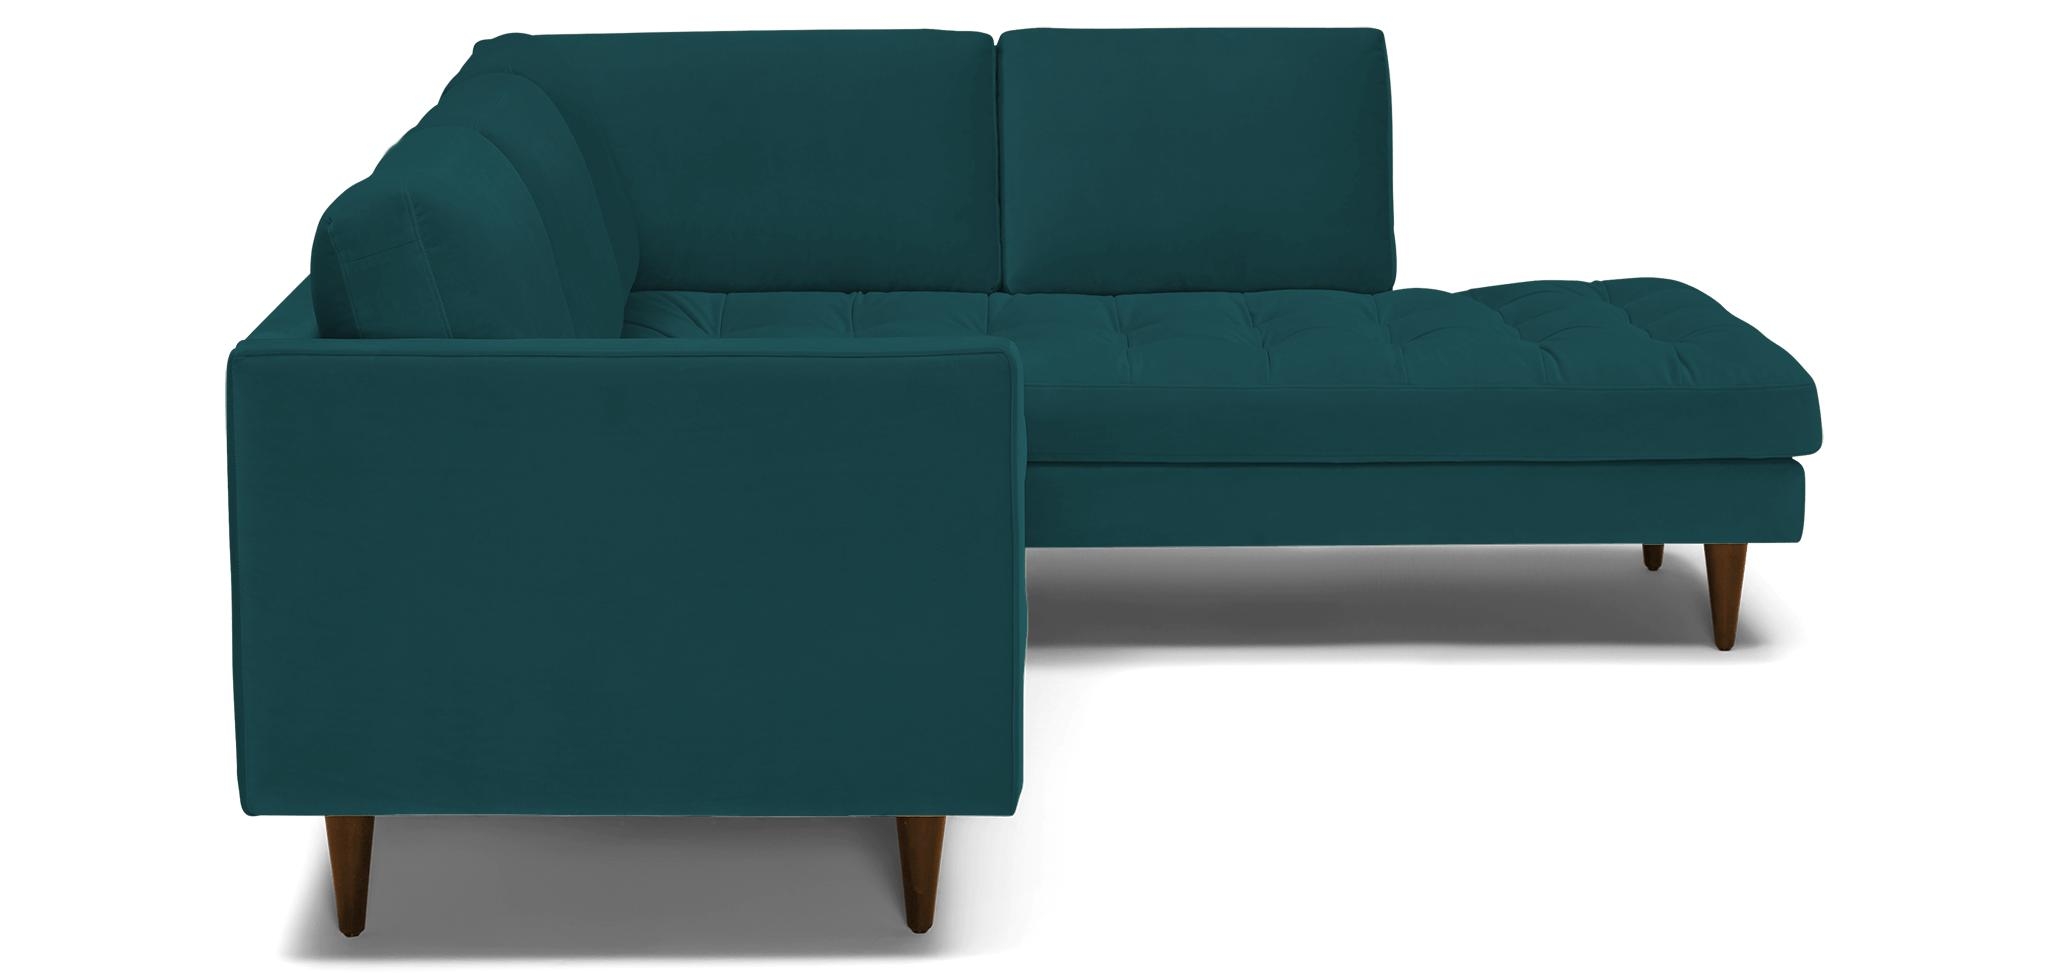 Blue Briar Mid Century Modern Sectional with Bumper - Royale Peacock - Mocha - Left - Image 3